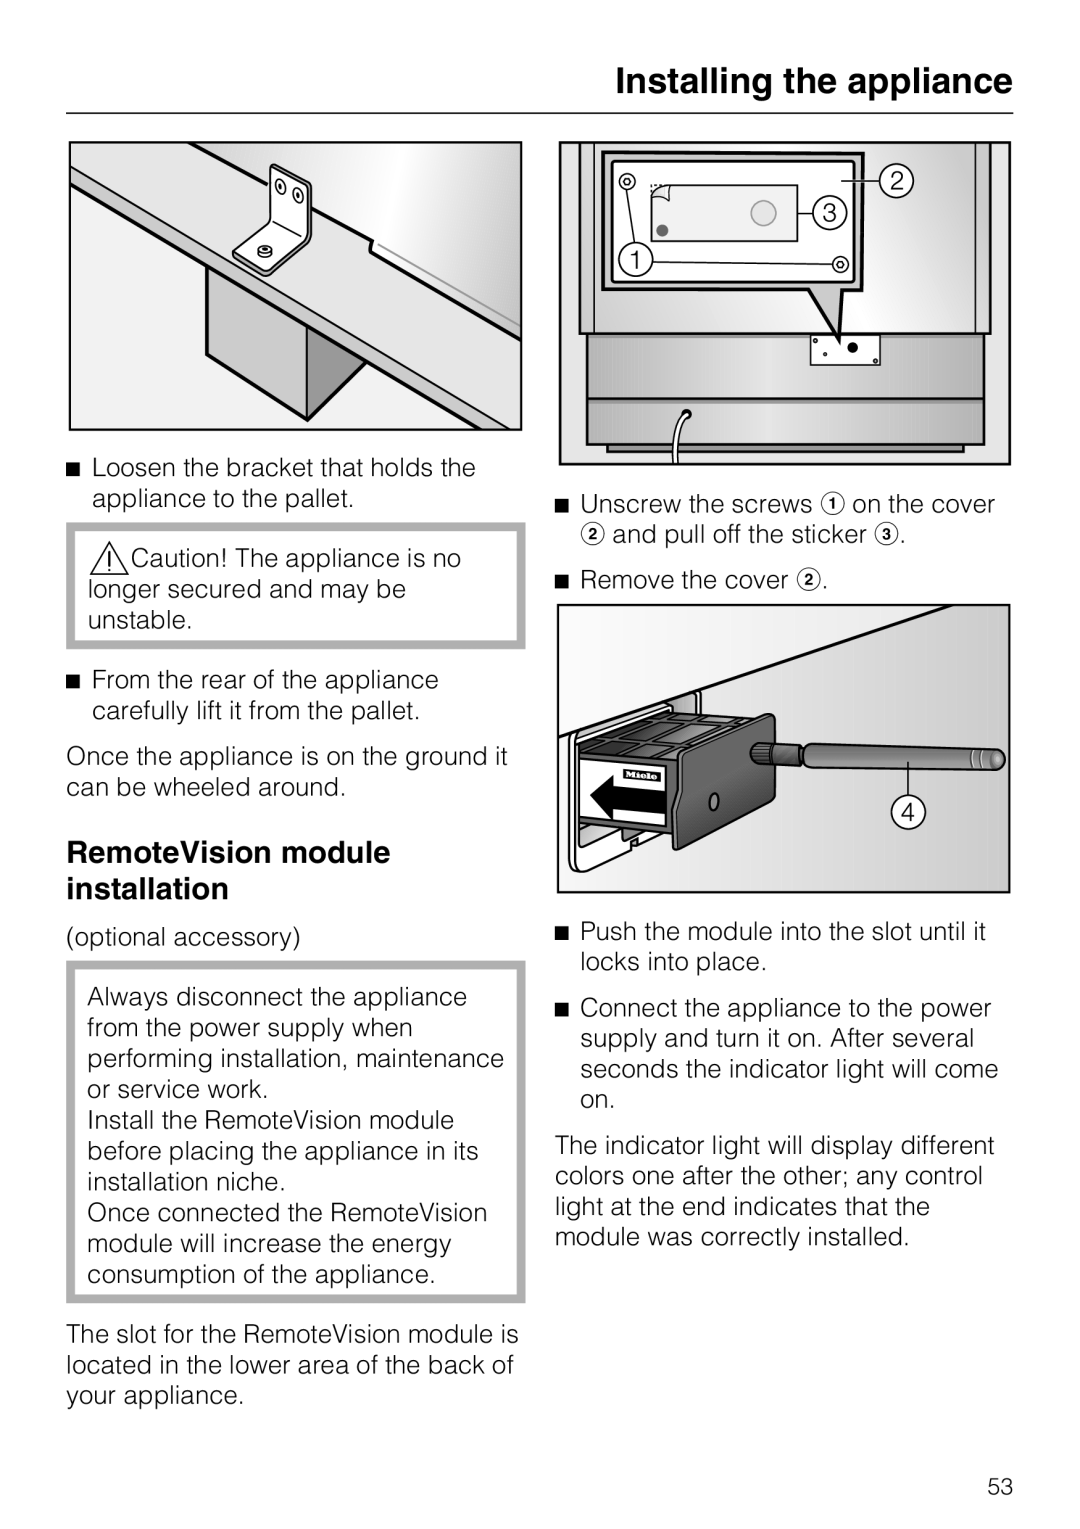 Miele F1911SF, F1801SF, F1811SF, F1901SF installation instructions RemoteVision module installation, Installing the appliance 